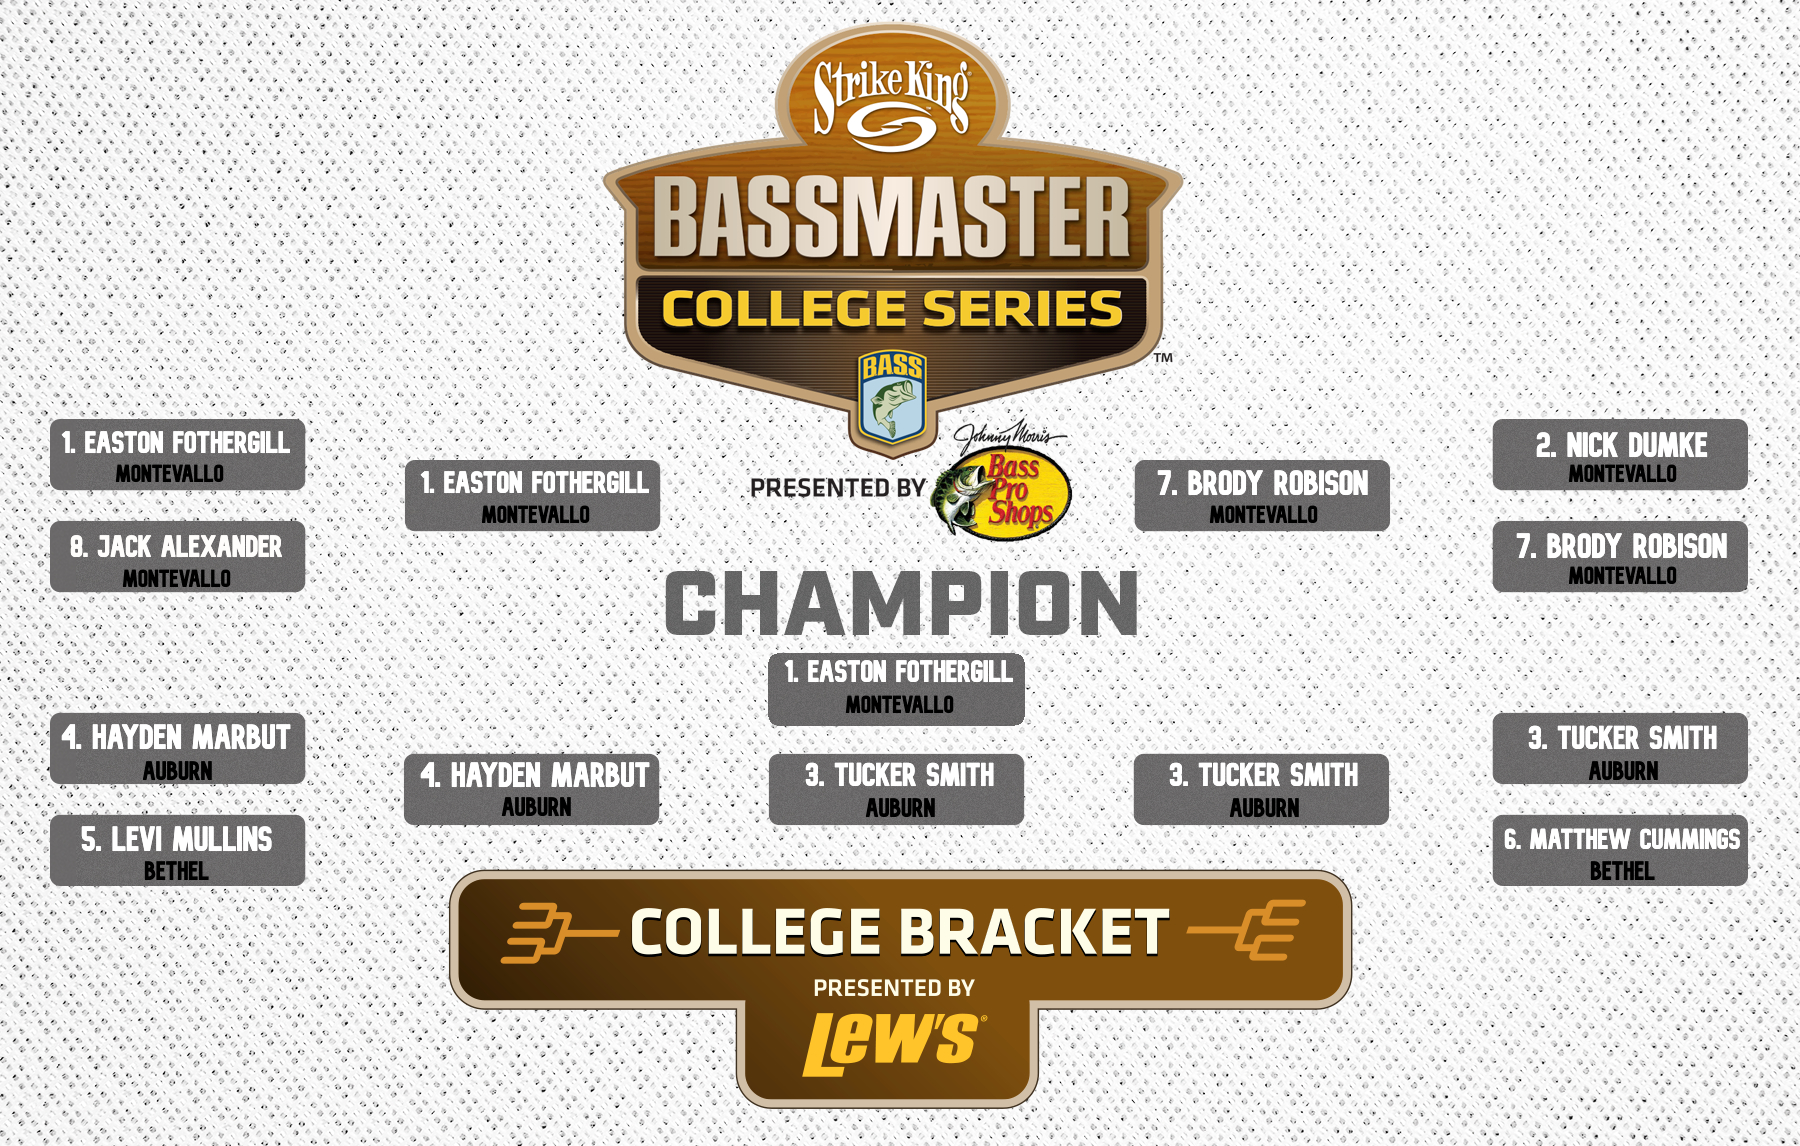 2023 Bassmaster College Classic Bracket presented by Lew's